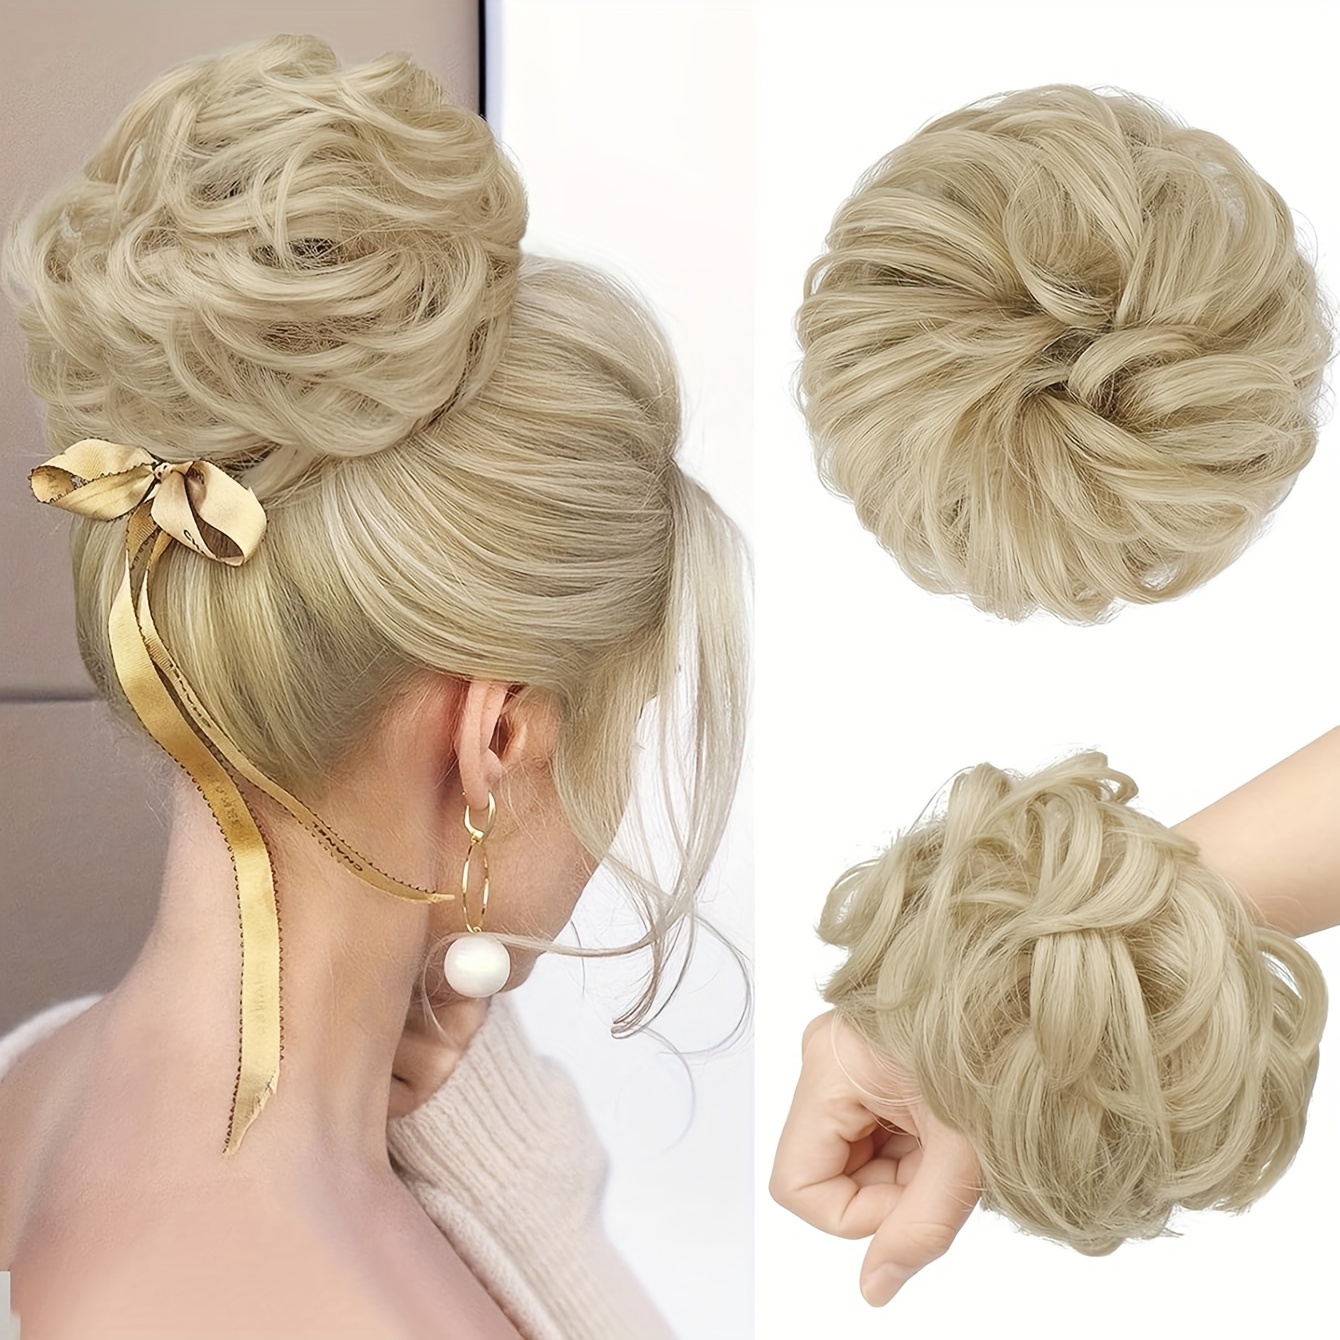 

Messy Bun Hair Piece Wavy Curly Scrunchies Synthetic Natural Blonde Ponytail Large Hair Extensions Thick Updo Hairpieces For Women